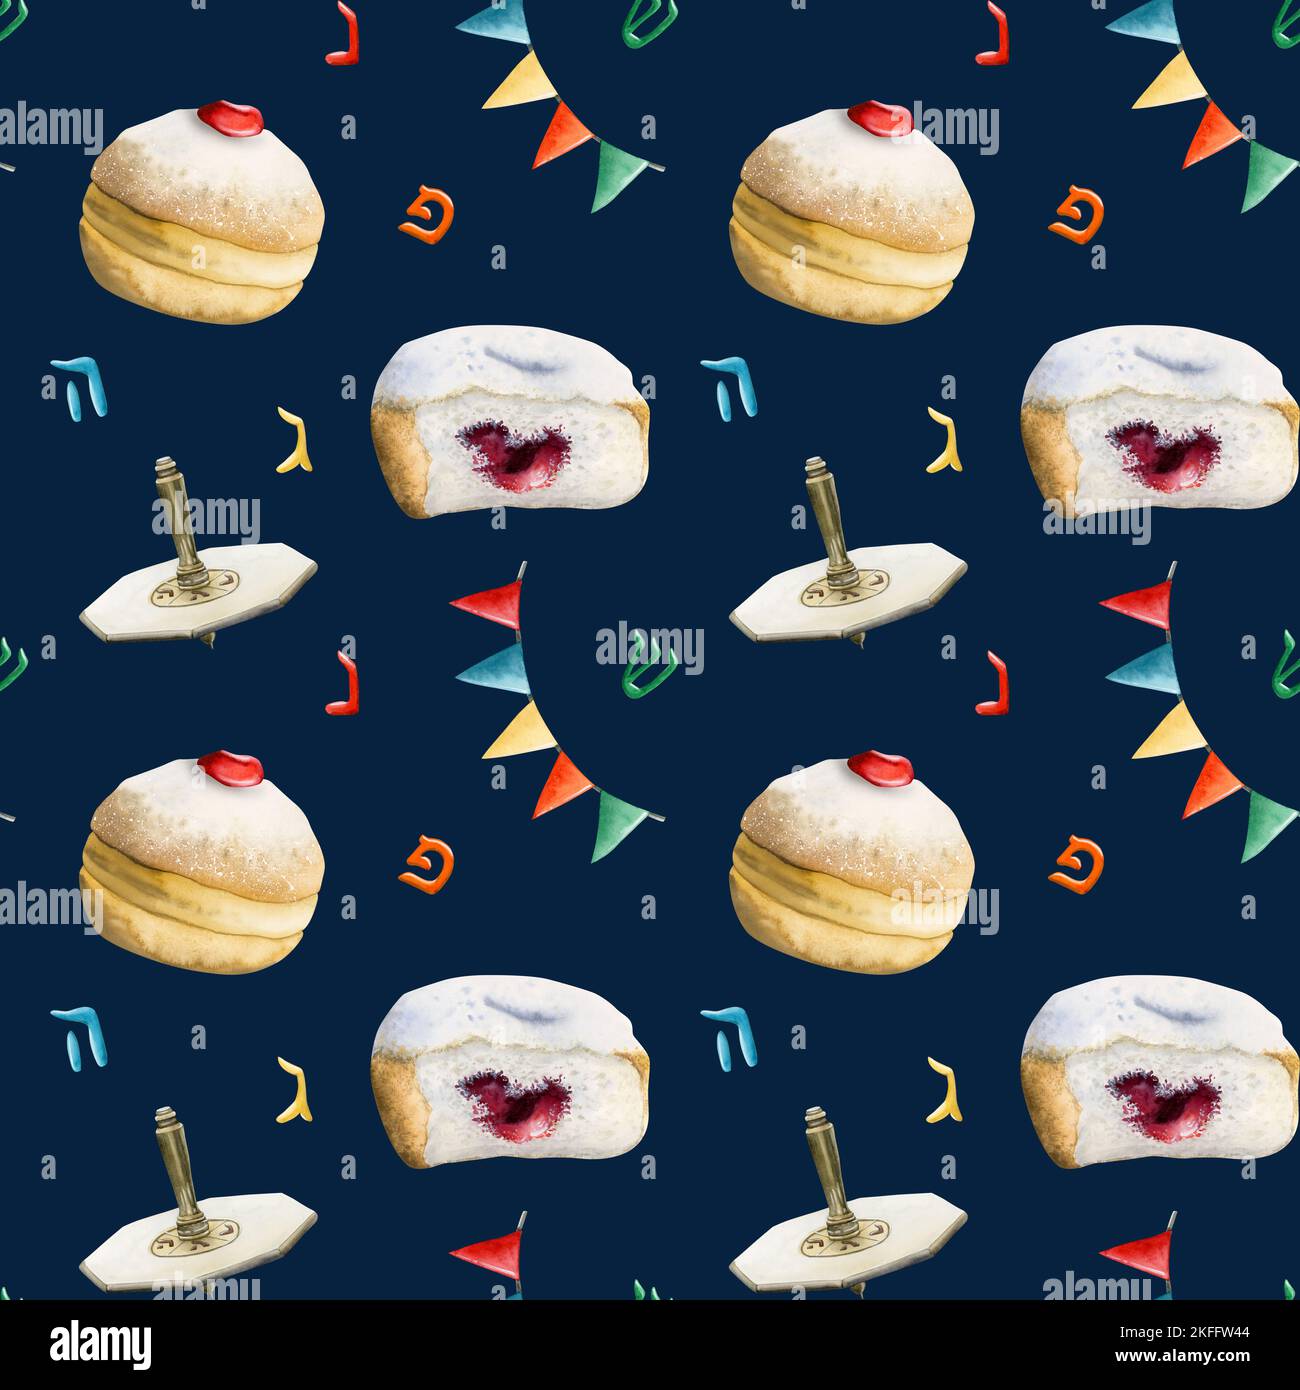 Hand drawing Hanukkah seamless pattern on dark blue background with traditional symbols. Donuts, dreidels, flags and Hebrew letters Stock Photo